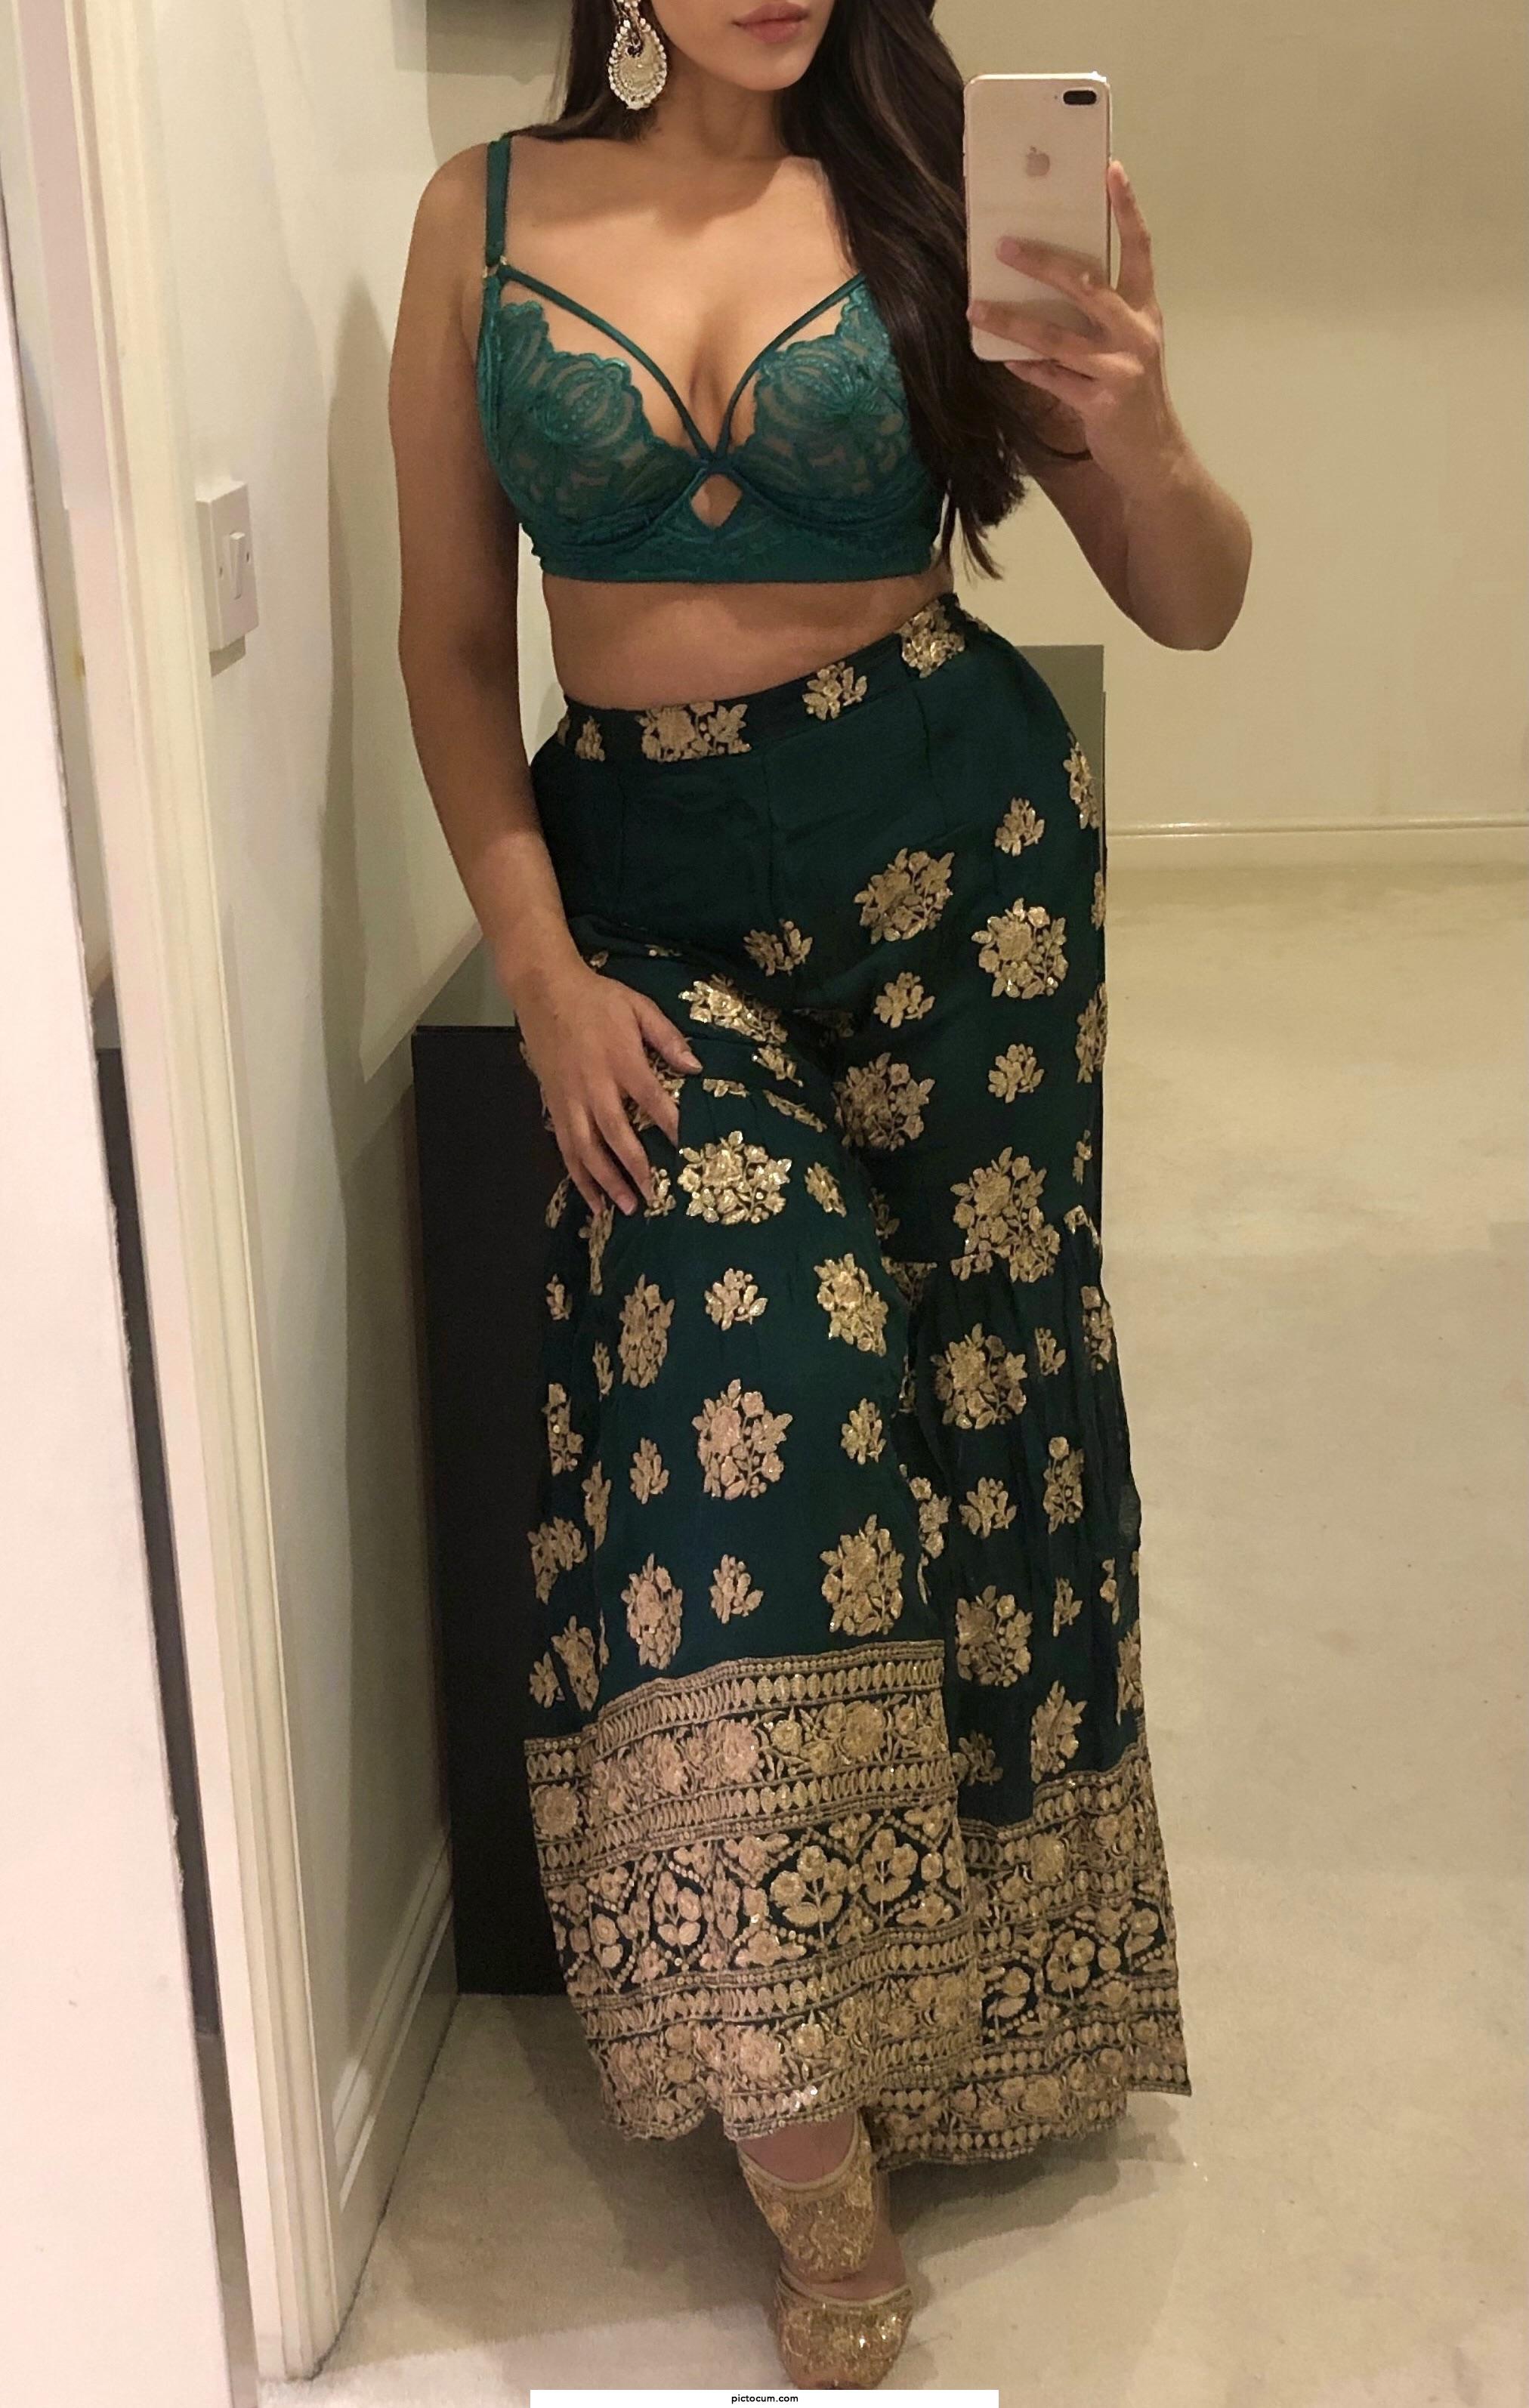 The hottest outfits are worn to be taken off...😈 British Punjabi Indian